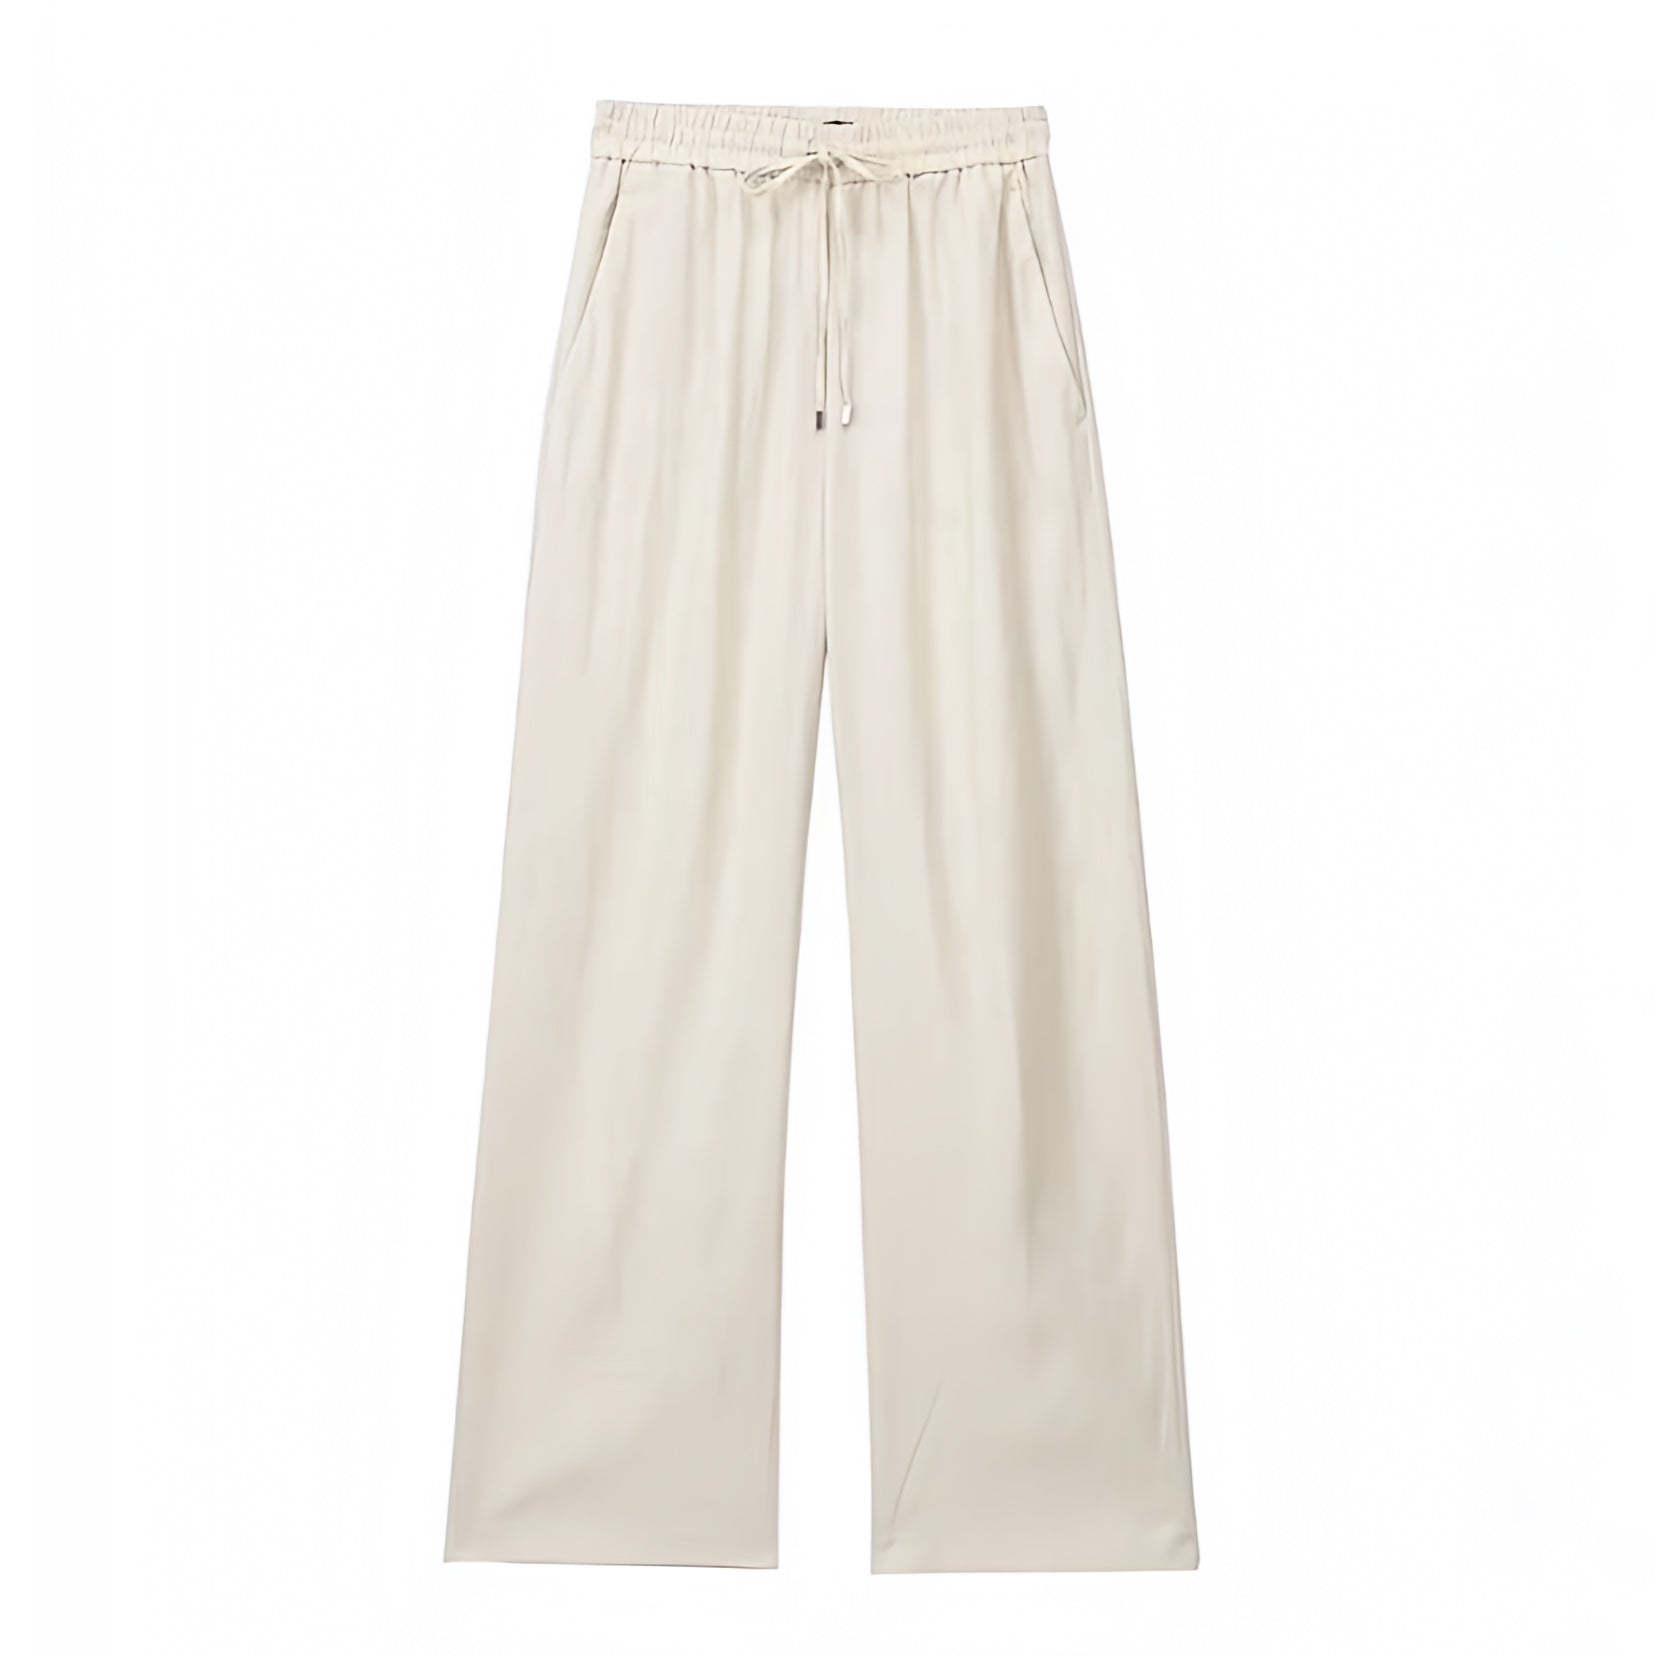 beige-khaki-neutral-cotton-linen-mid-low-rise-waisted-draw-string-tie-fitted-waist-straight-wide-leg-loose-light-weight-trouser-pants-joggers-sweatpants-with-pockets-comfortable-cozy-women-ladies-chic-trendy-spring-2024-summer-elegant-casual-feminine-lounge-european-vacation-beach-wear-zara-revolve-aritzia-brandy-melville-pacsun